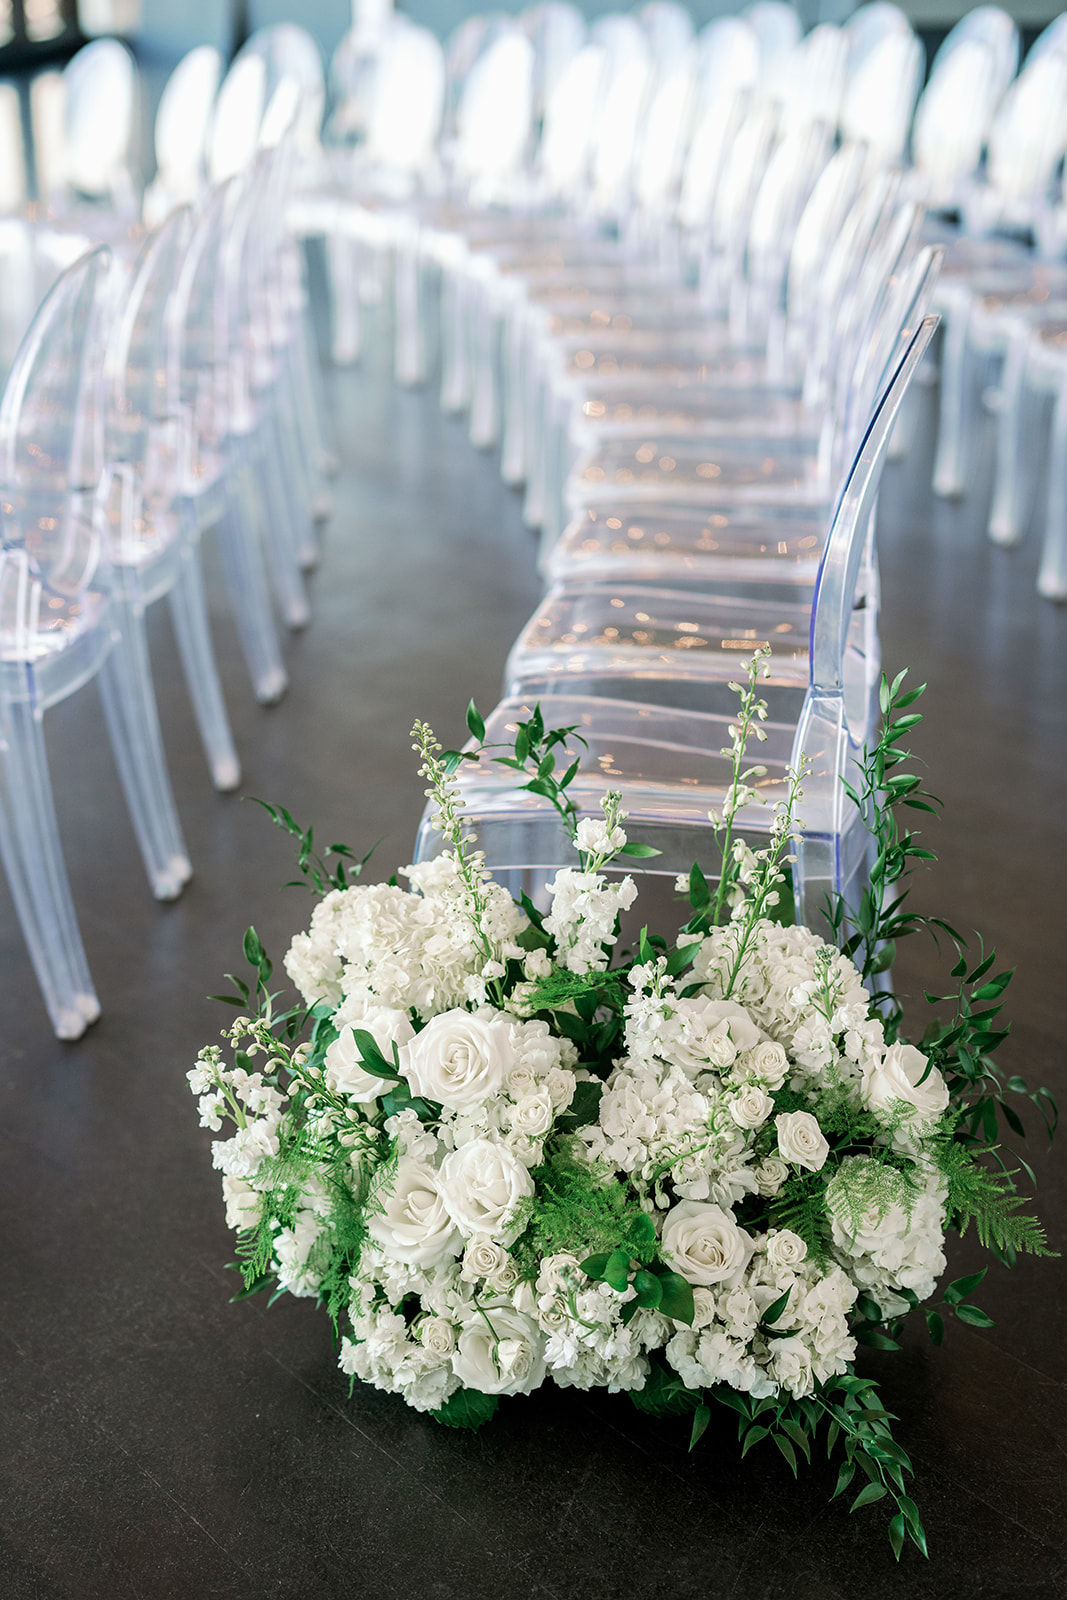 Indoor winter wedding ceremony aisle with white floral arrangements and ghost chairs at the Boston State Room.